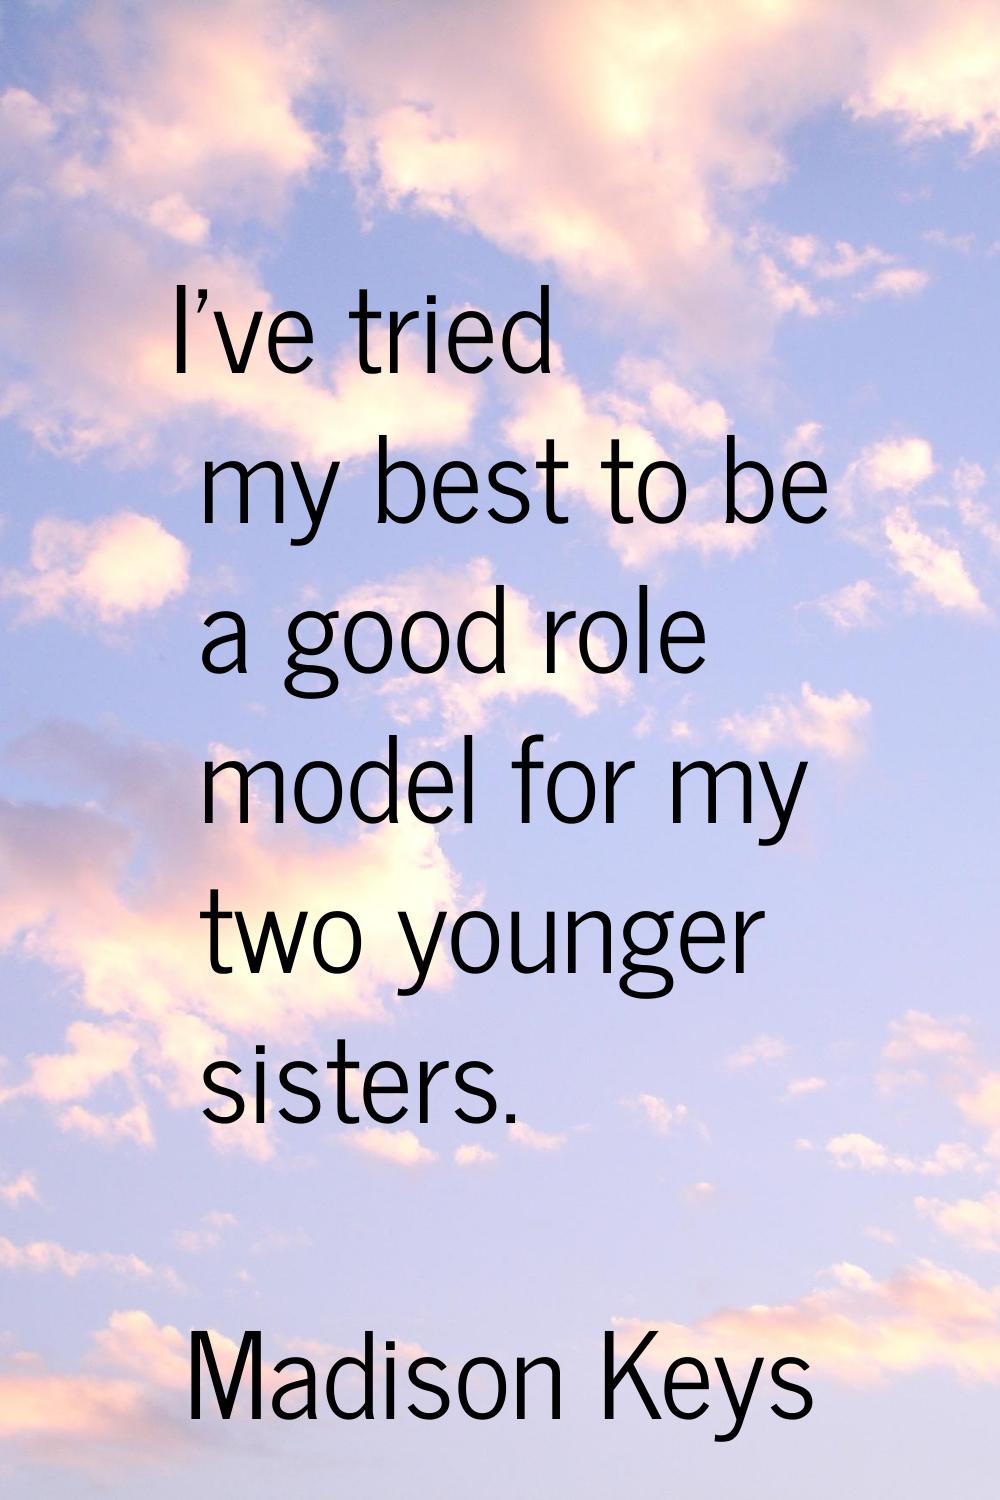 I've tried my best to be a good role model for my two younger sisters.